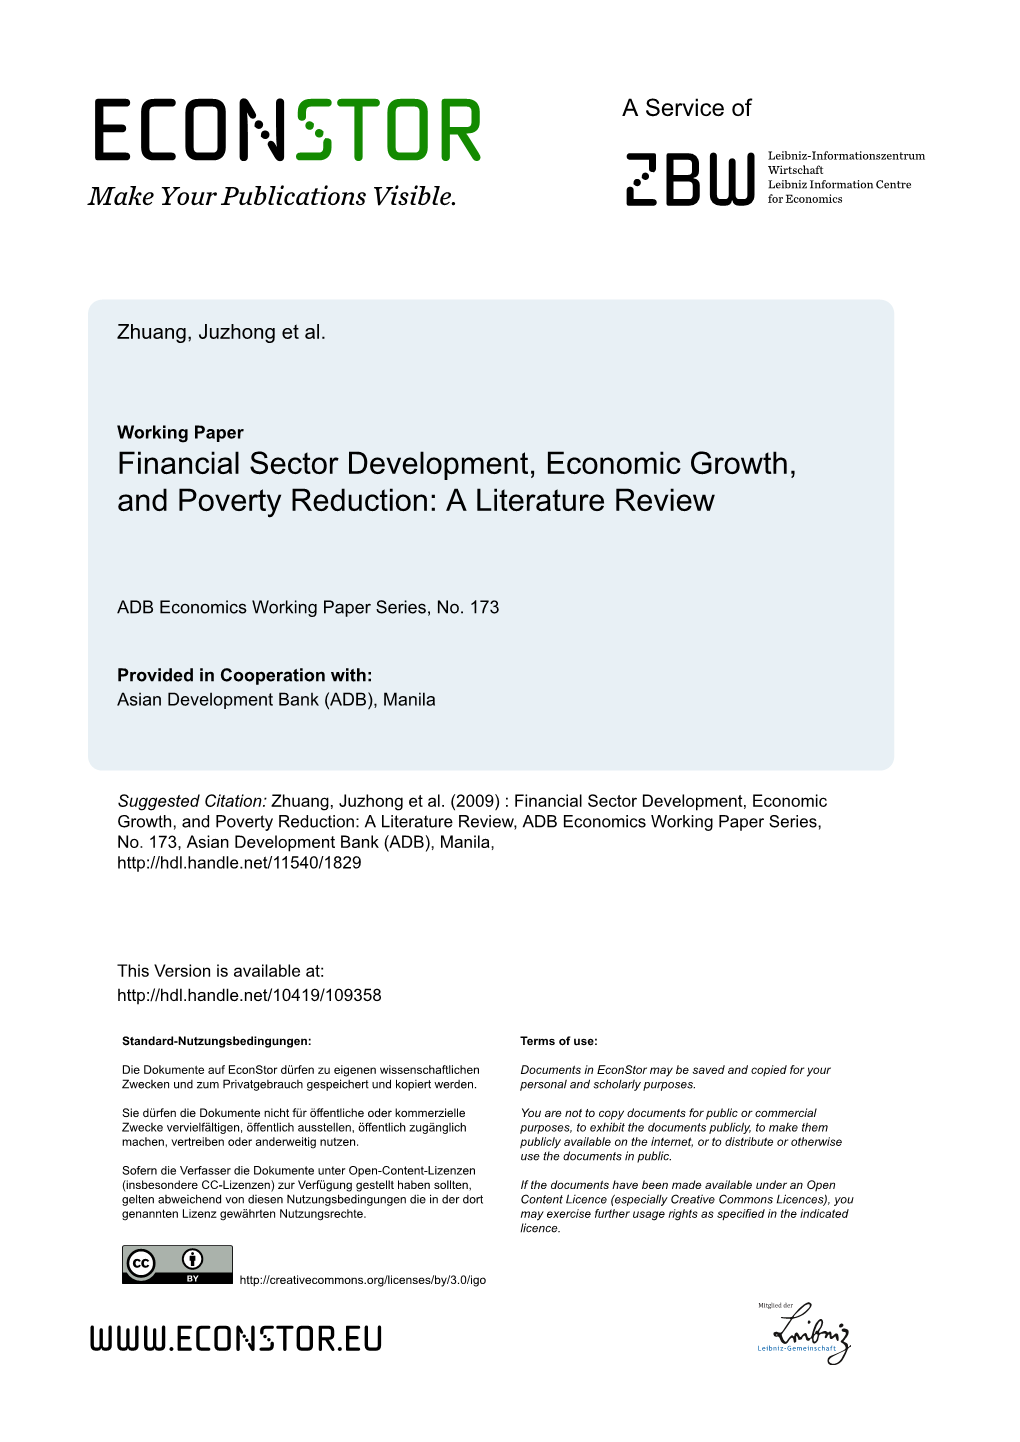 Financial Sector Development, Economic Growth, and Poverty Reduction: a Literature Review